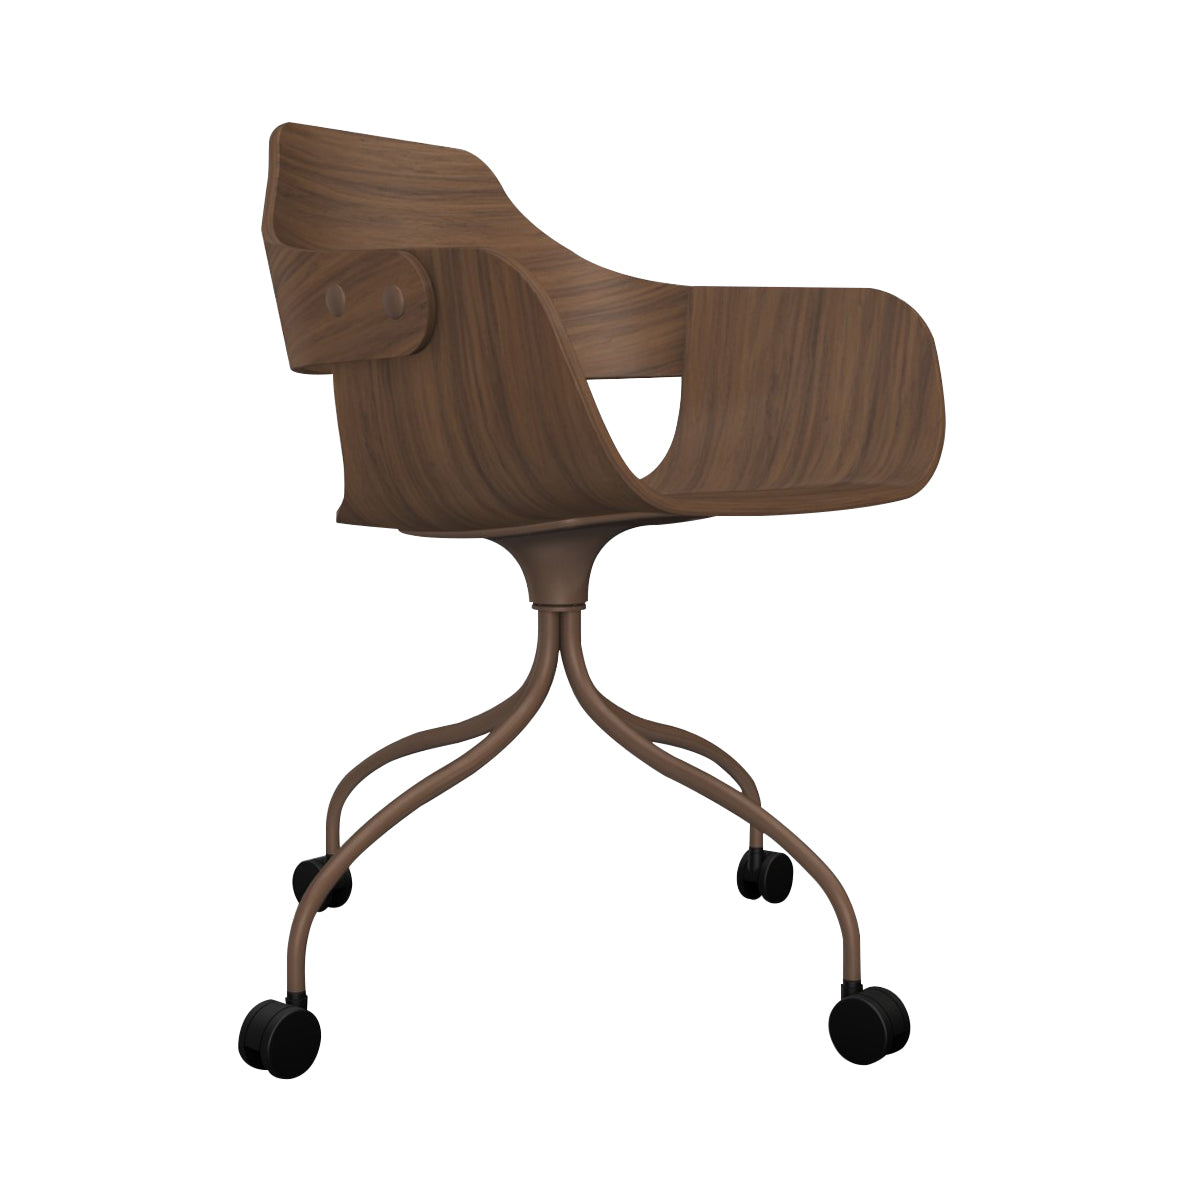 Showtime Chair with Wheel: Walnut + Pale Brown